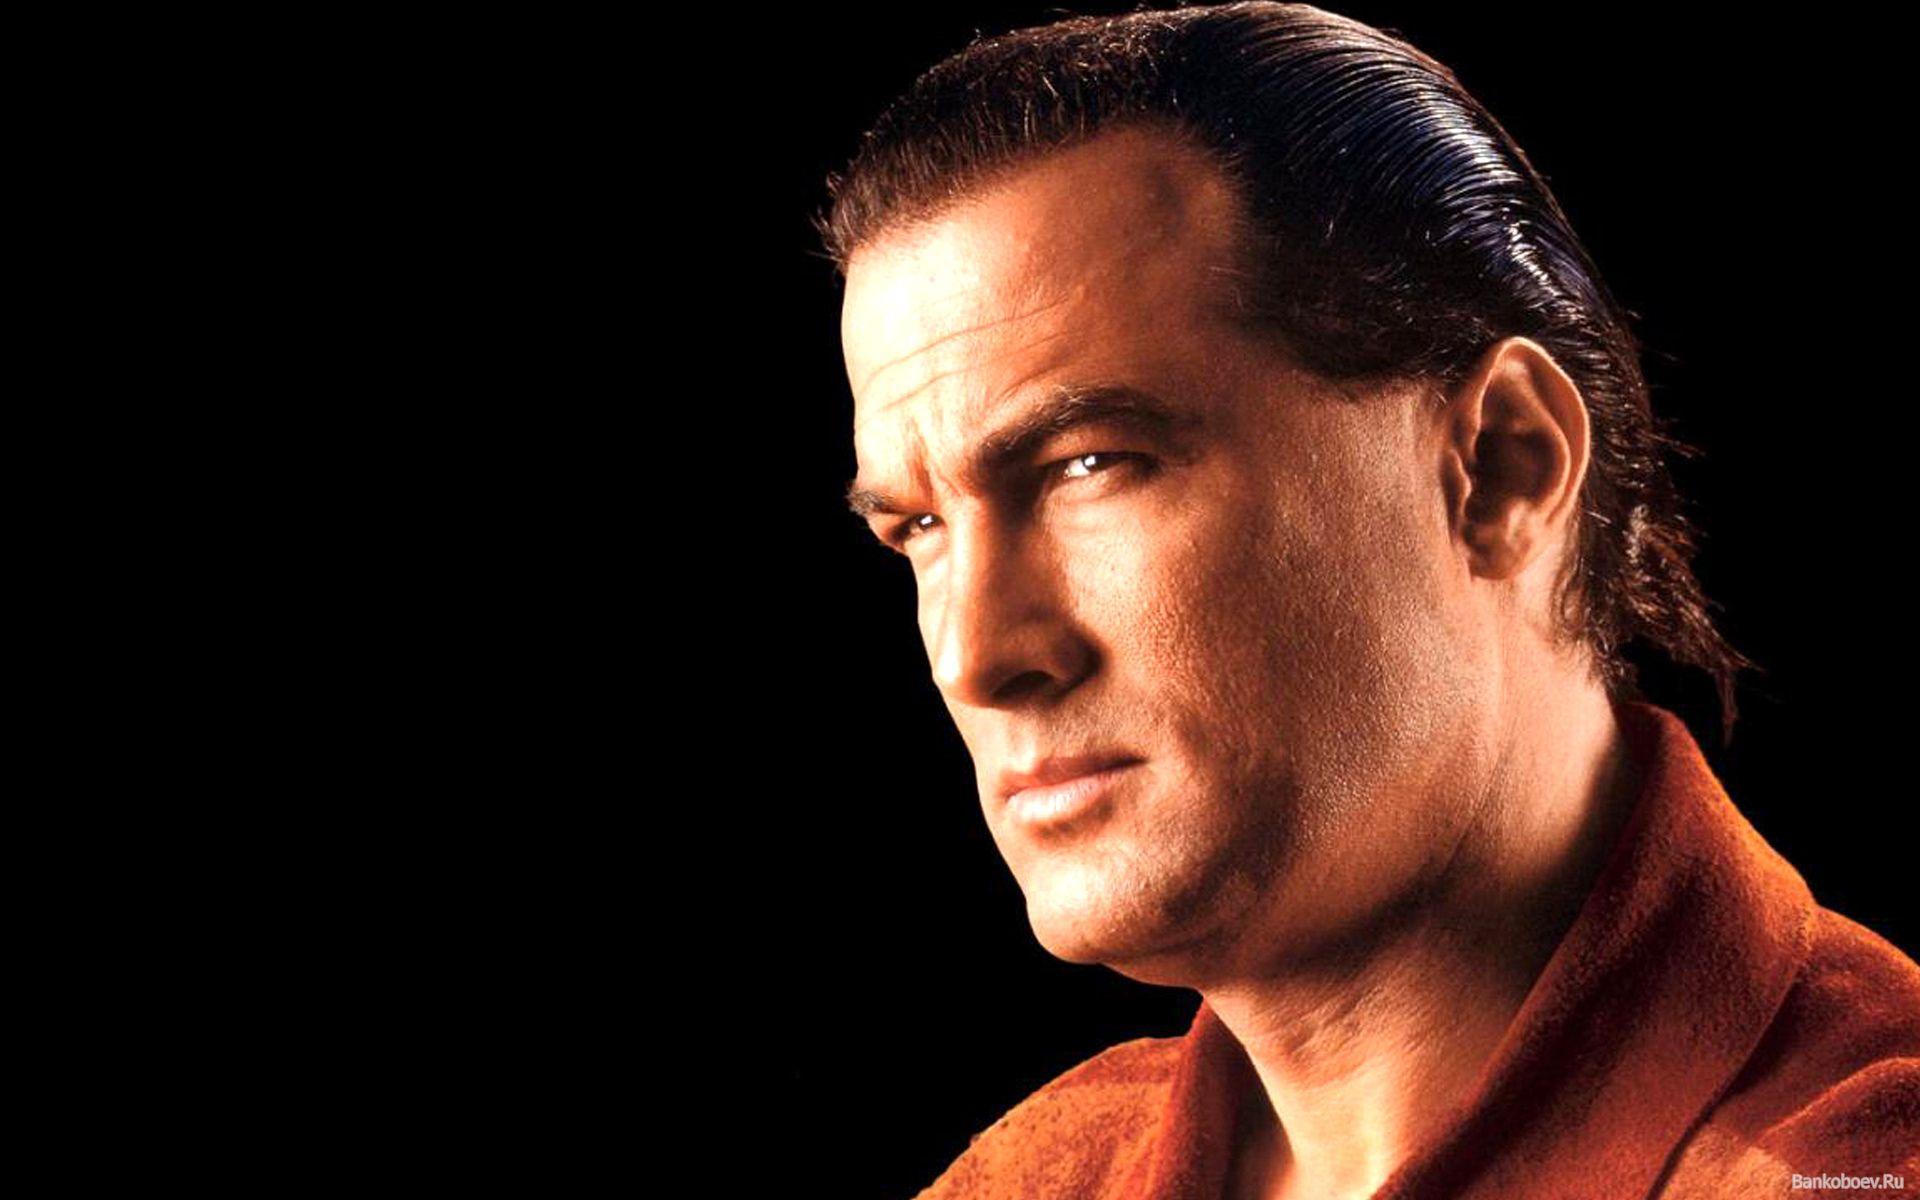 Steven Seagal on dark background wallpaper and image